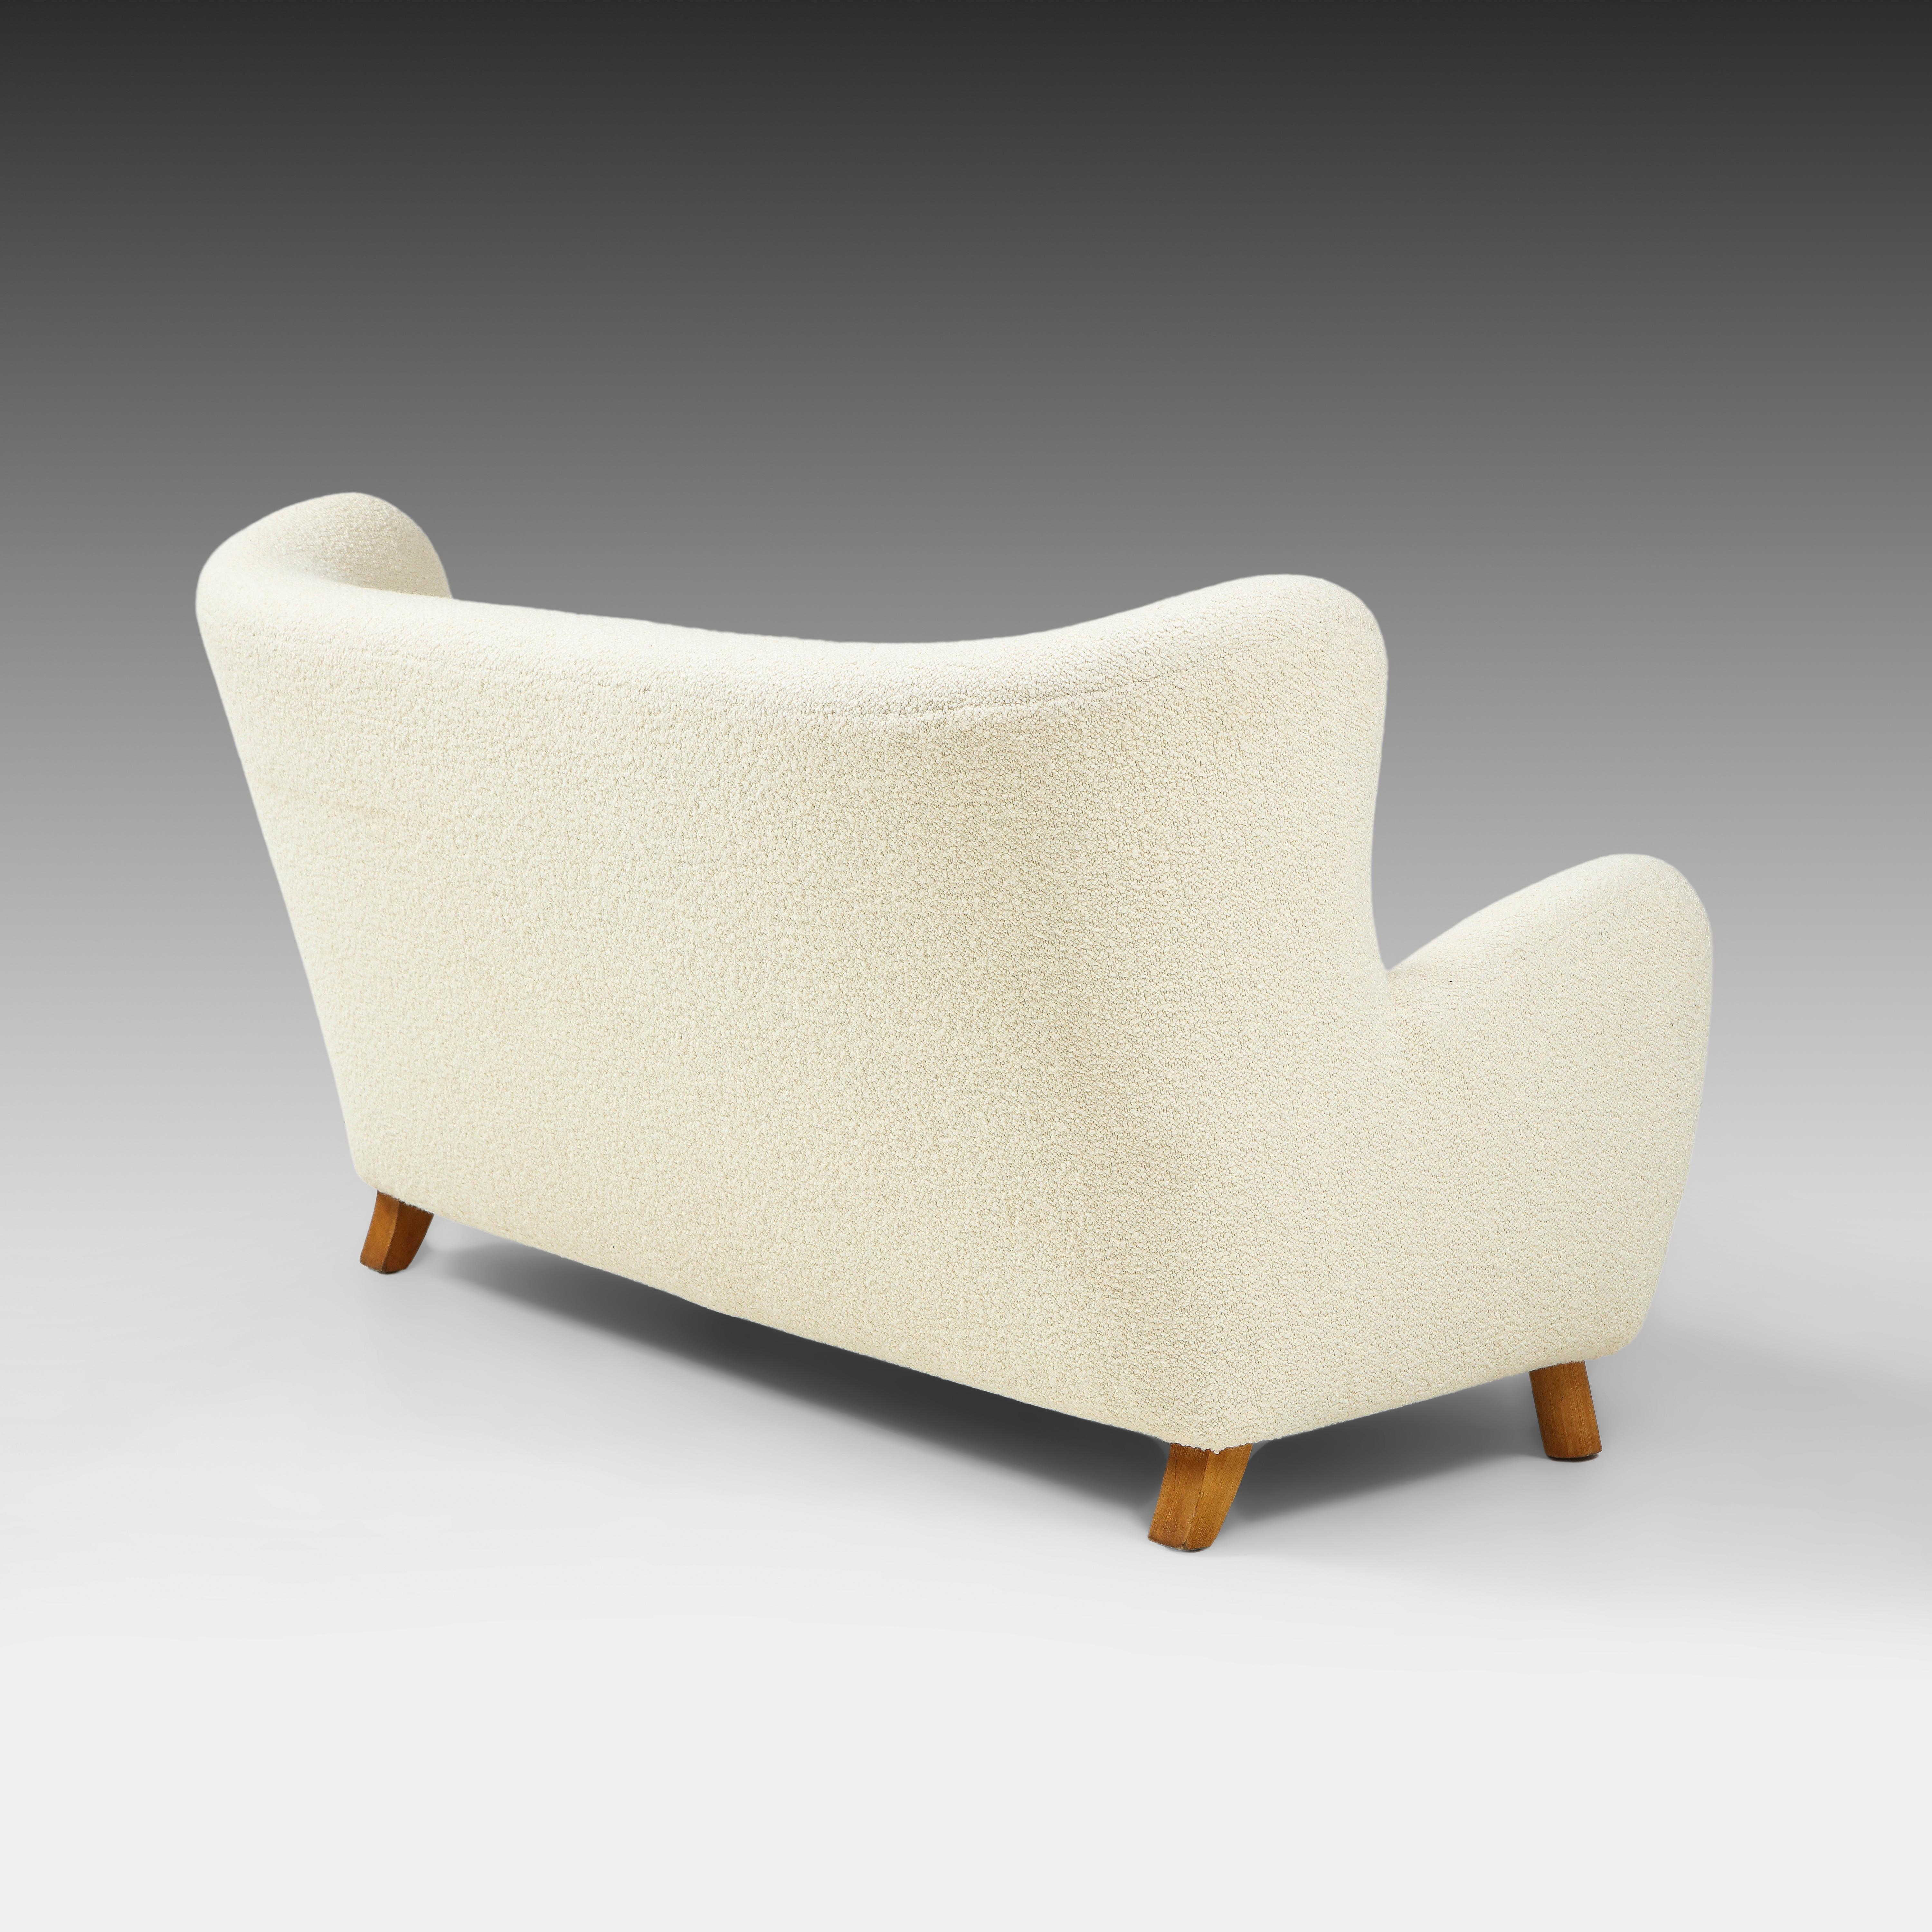 Mogens Lassen Rare Organic Sofa in Ivory Bouclé, Denmark, 1930s In Good Condition For Sale In New York, NY